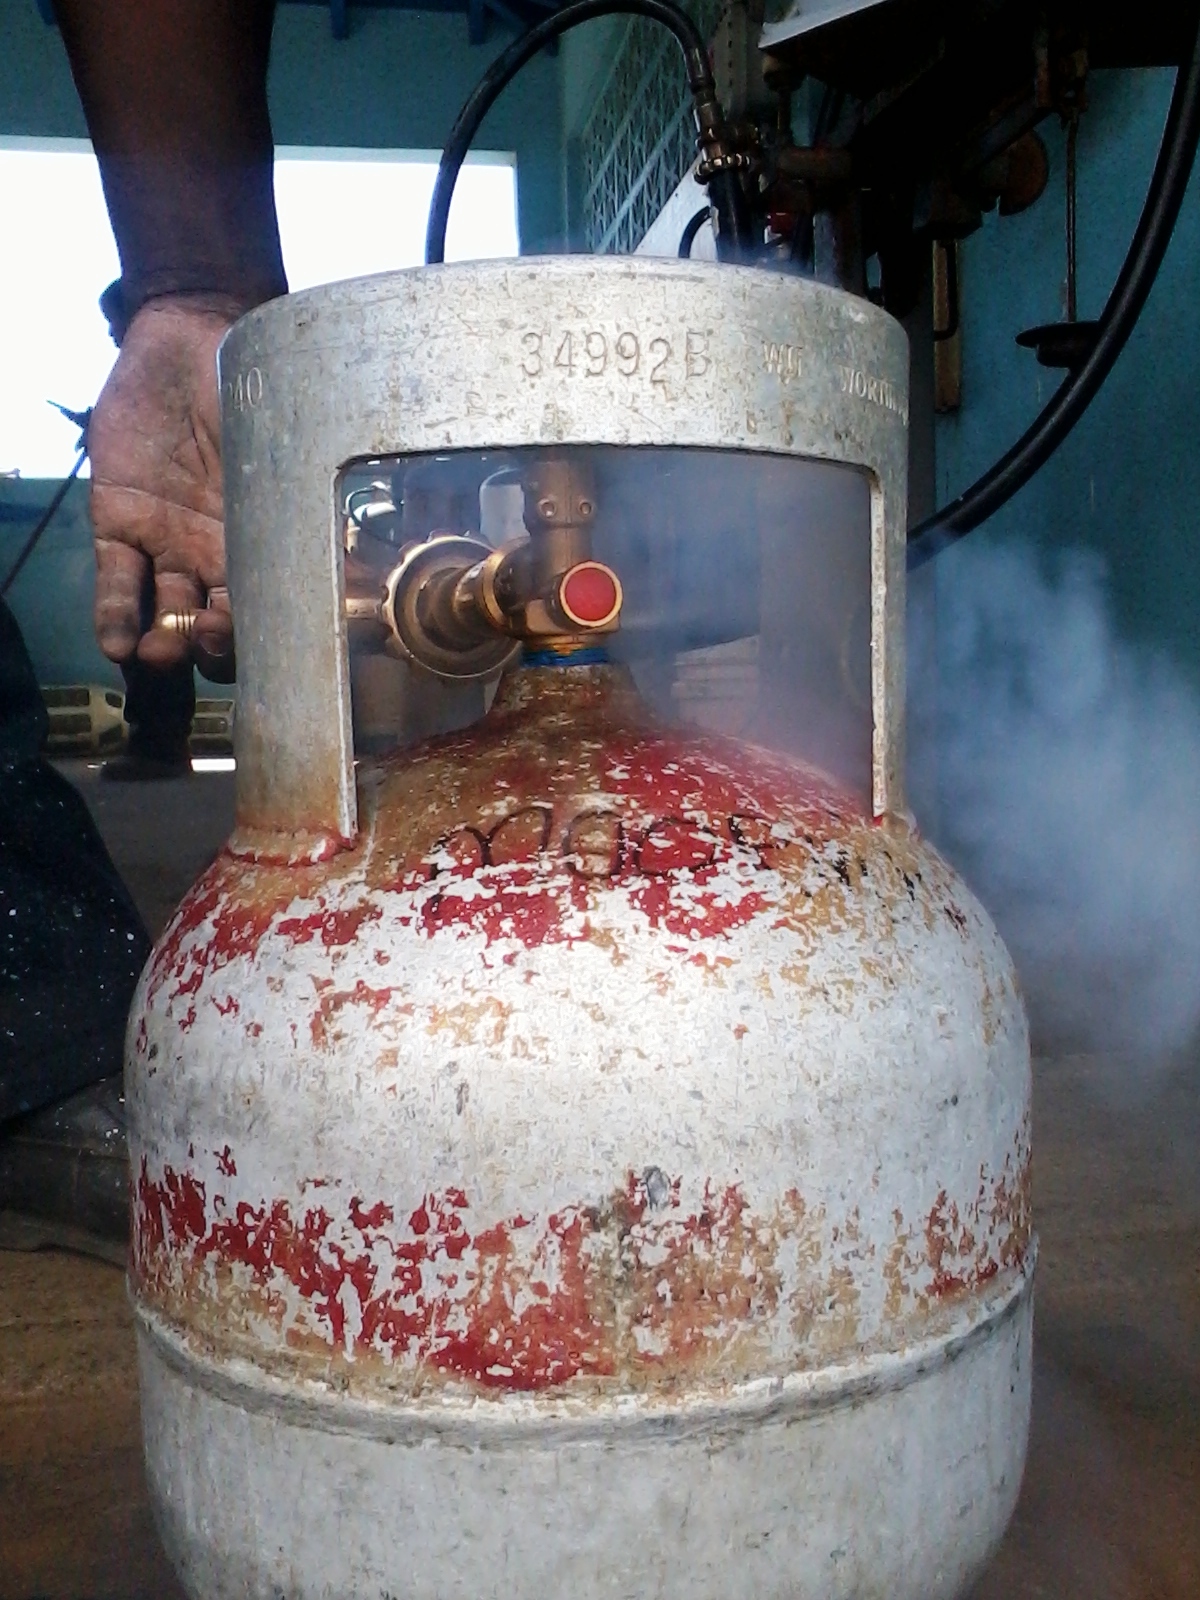 Another propane tank